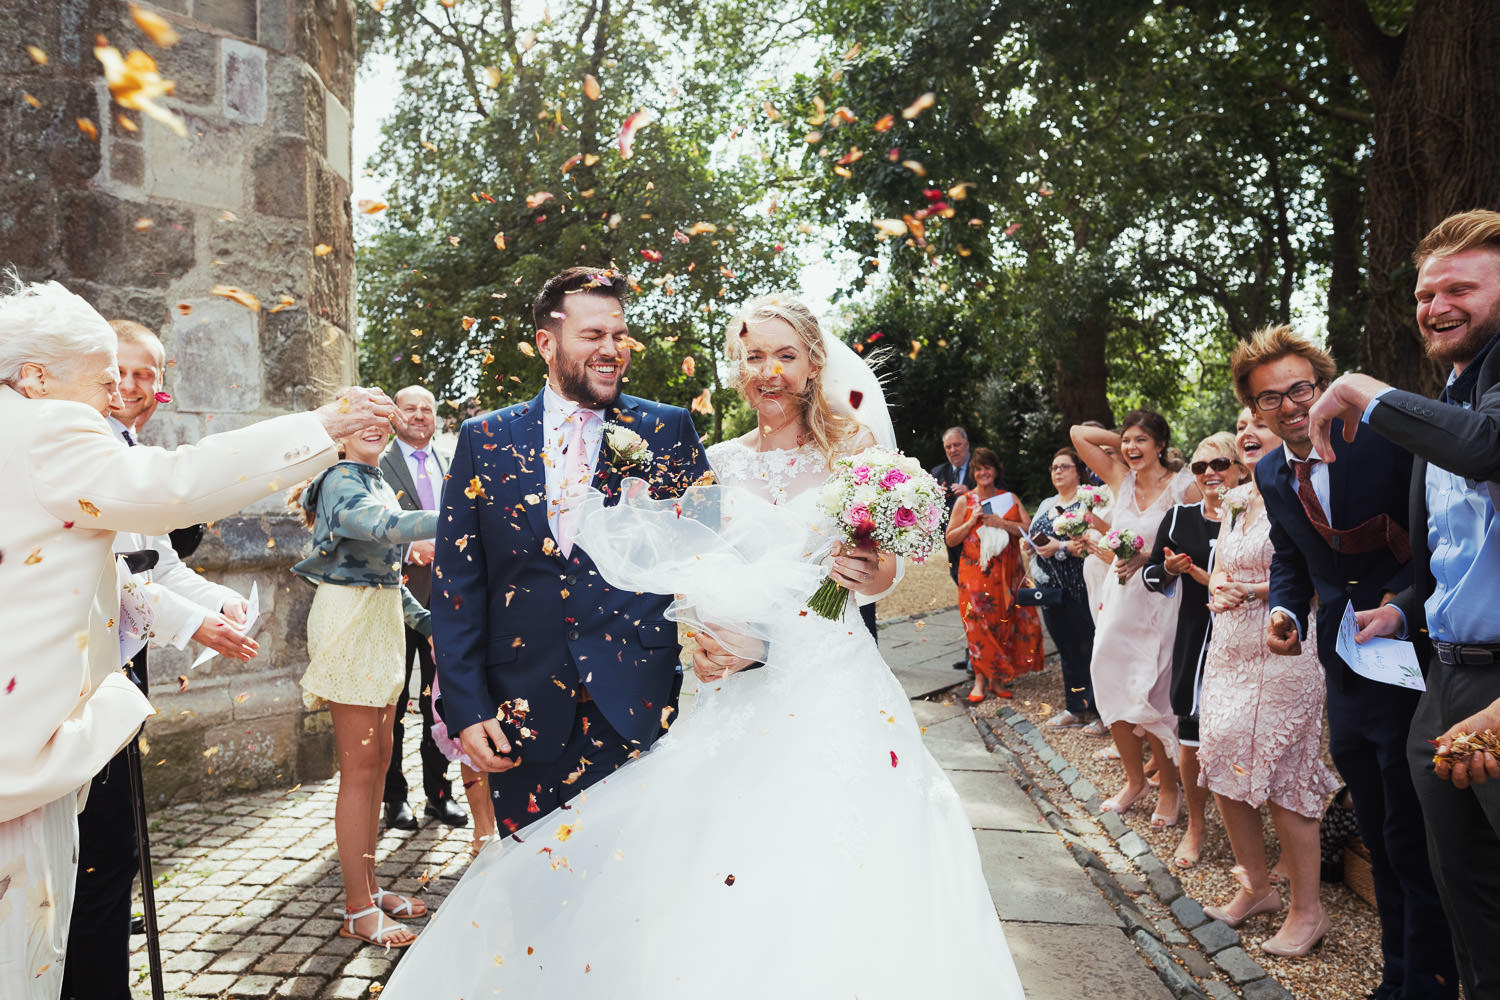 Wedding guests throw confetti petals at a couple after their wedding ceremony. It's a windy day.